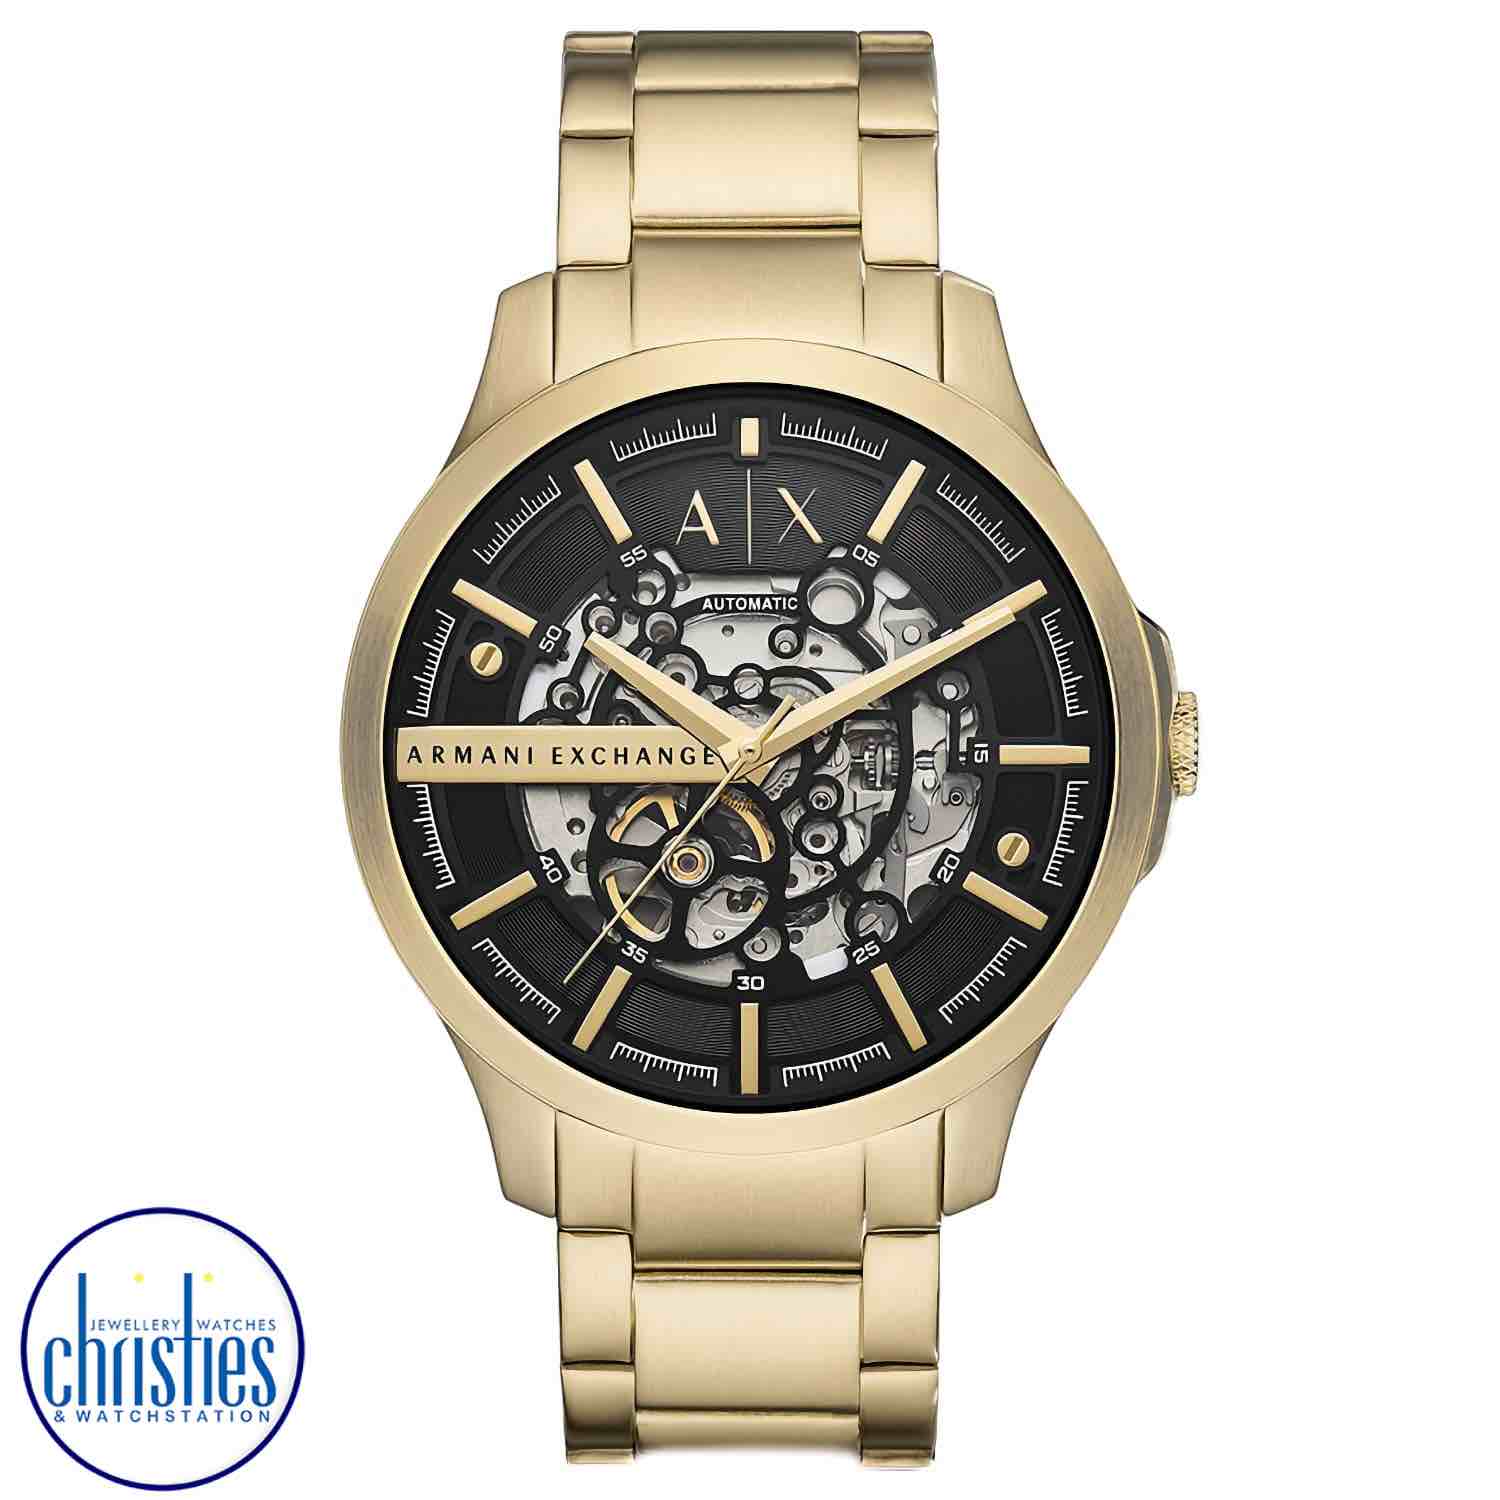 AX2419 A|X Armani Exchange Automatic Gold-Tone Stainless Steel Watch. AX2419 A|X Armani Exchange Automatic Gold-Tone Stainless Steel WatchAfterpay - Split your purchase into 4 instalments - Pay for your purchase over 4 instalments, due every two weeks.